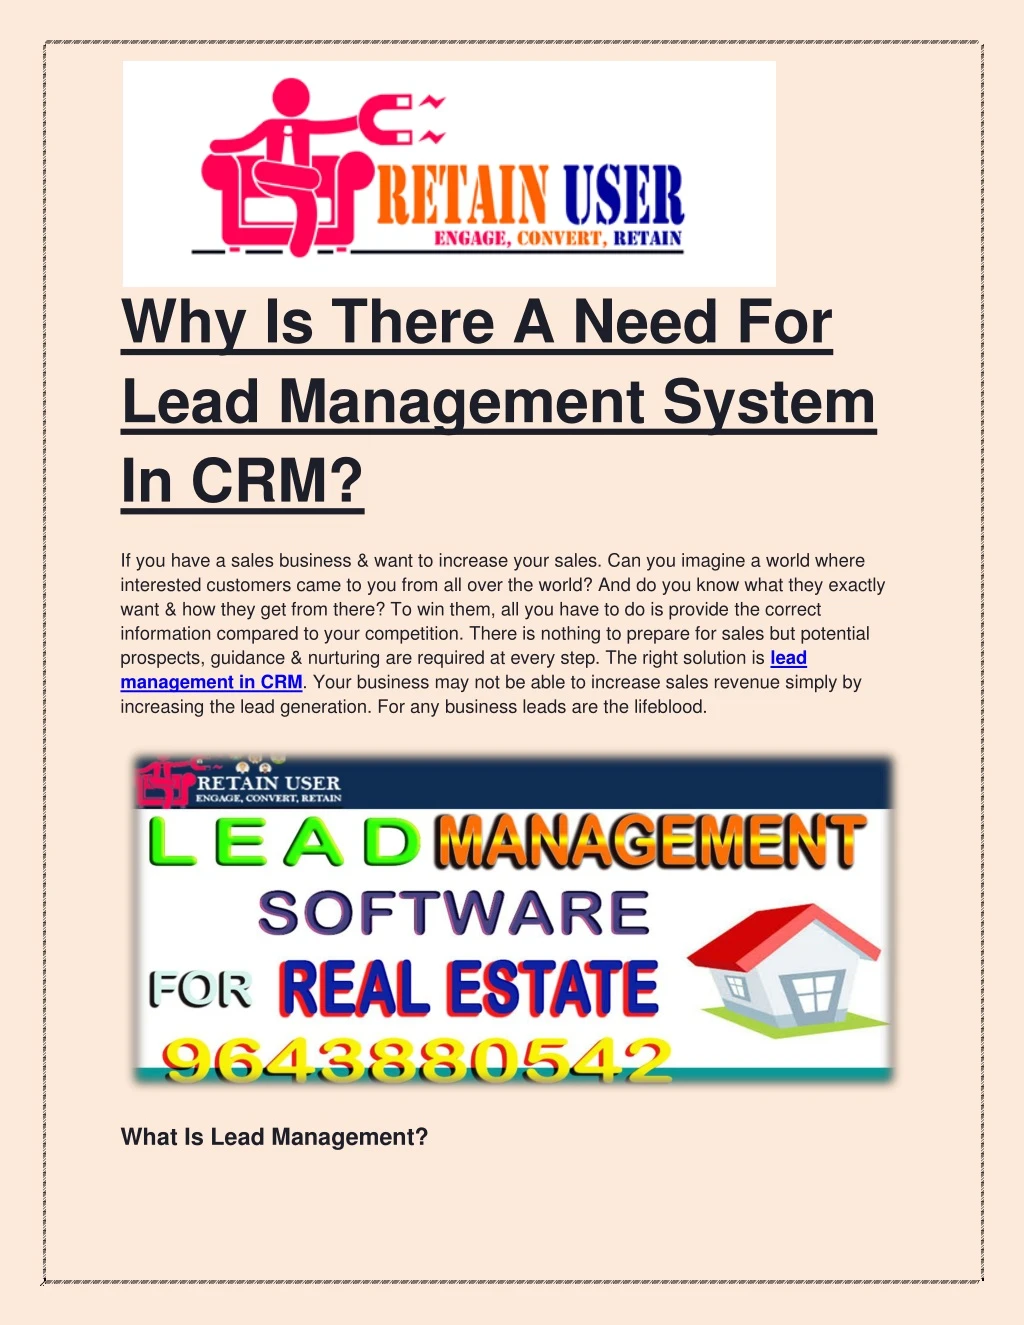 why is there a need for lead management system